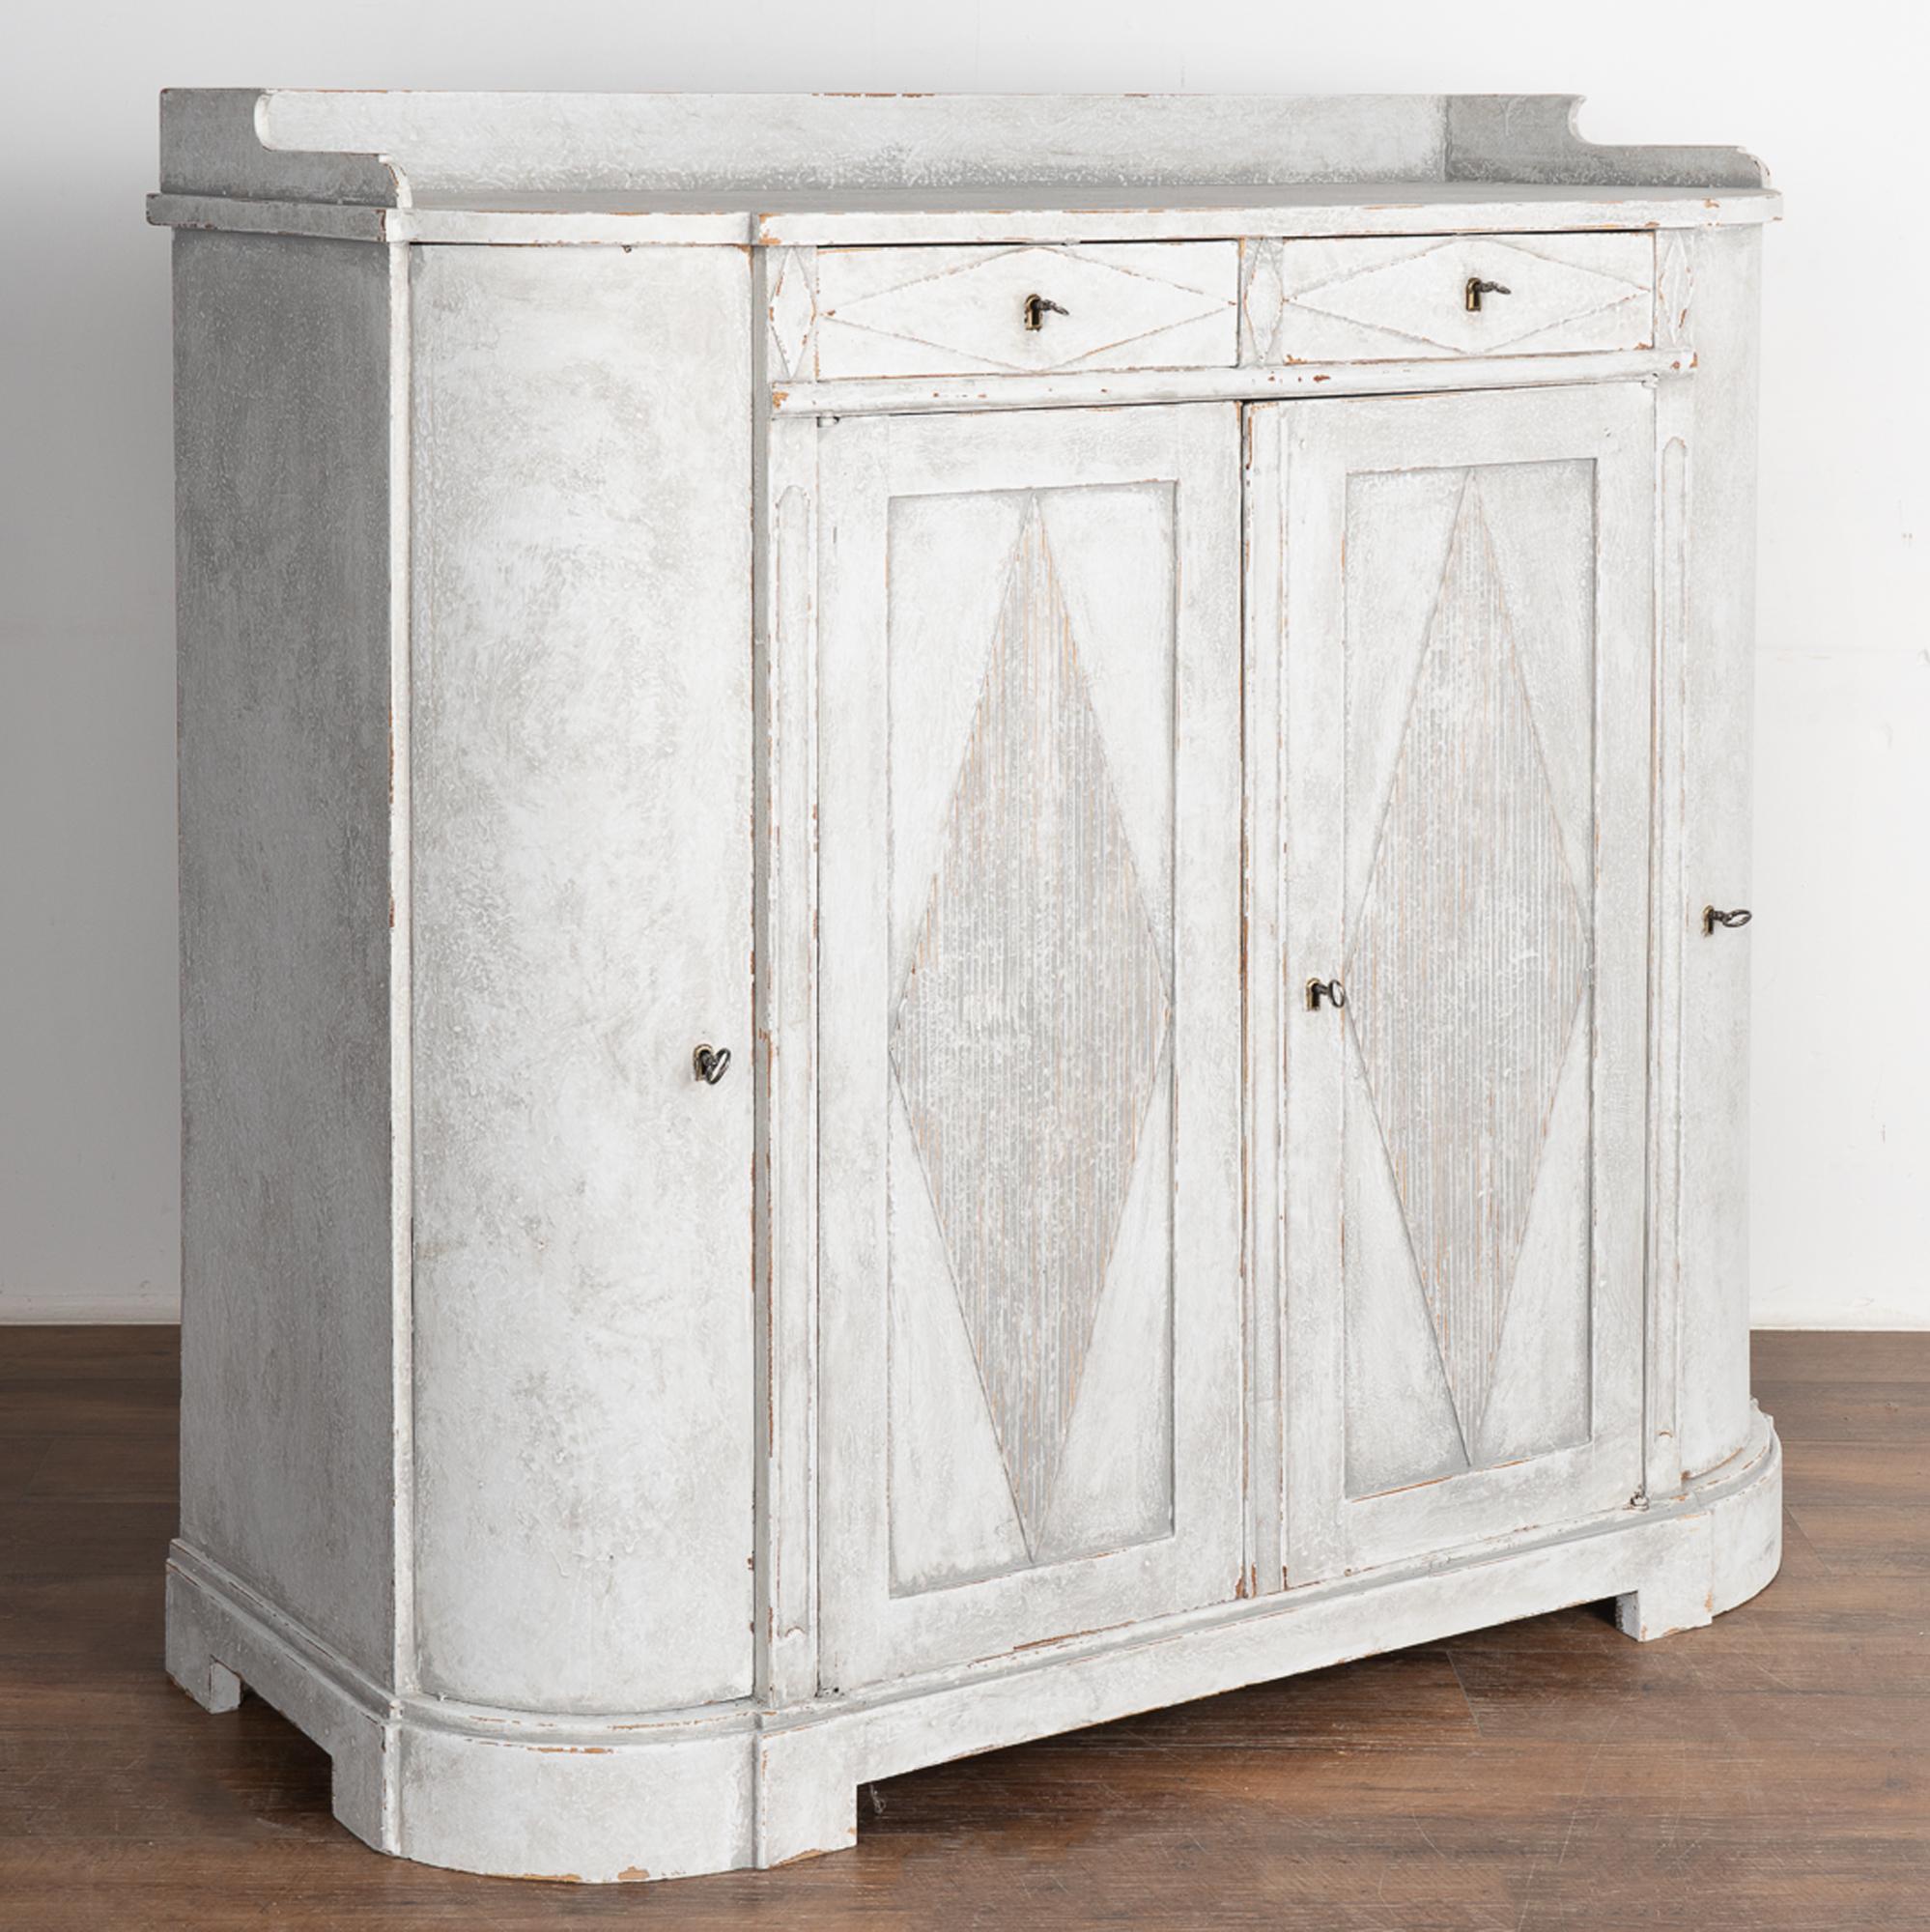 Tall Swedish Gustavian gray painted pine sideboard with attractive curved sides and traditional fluted diamond details on panel doors.
The curved long cabinet doors make this cabinet a special find, along with the allure of the layered painted